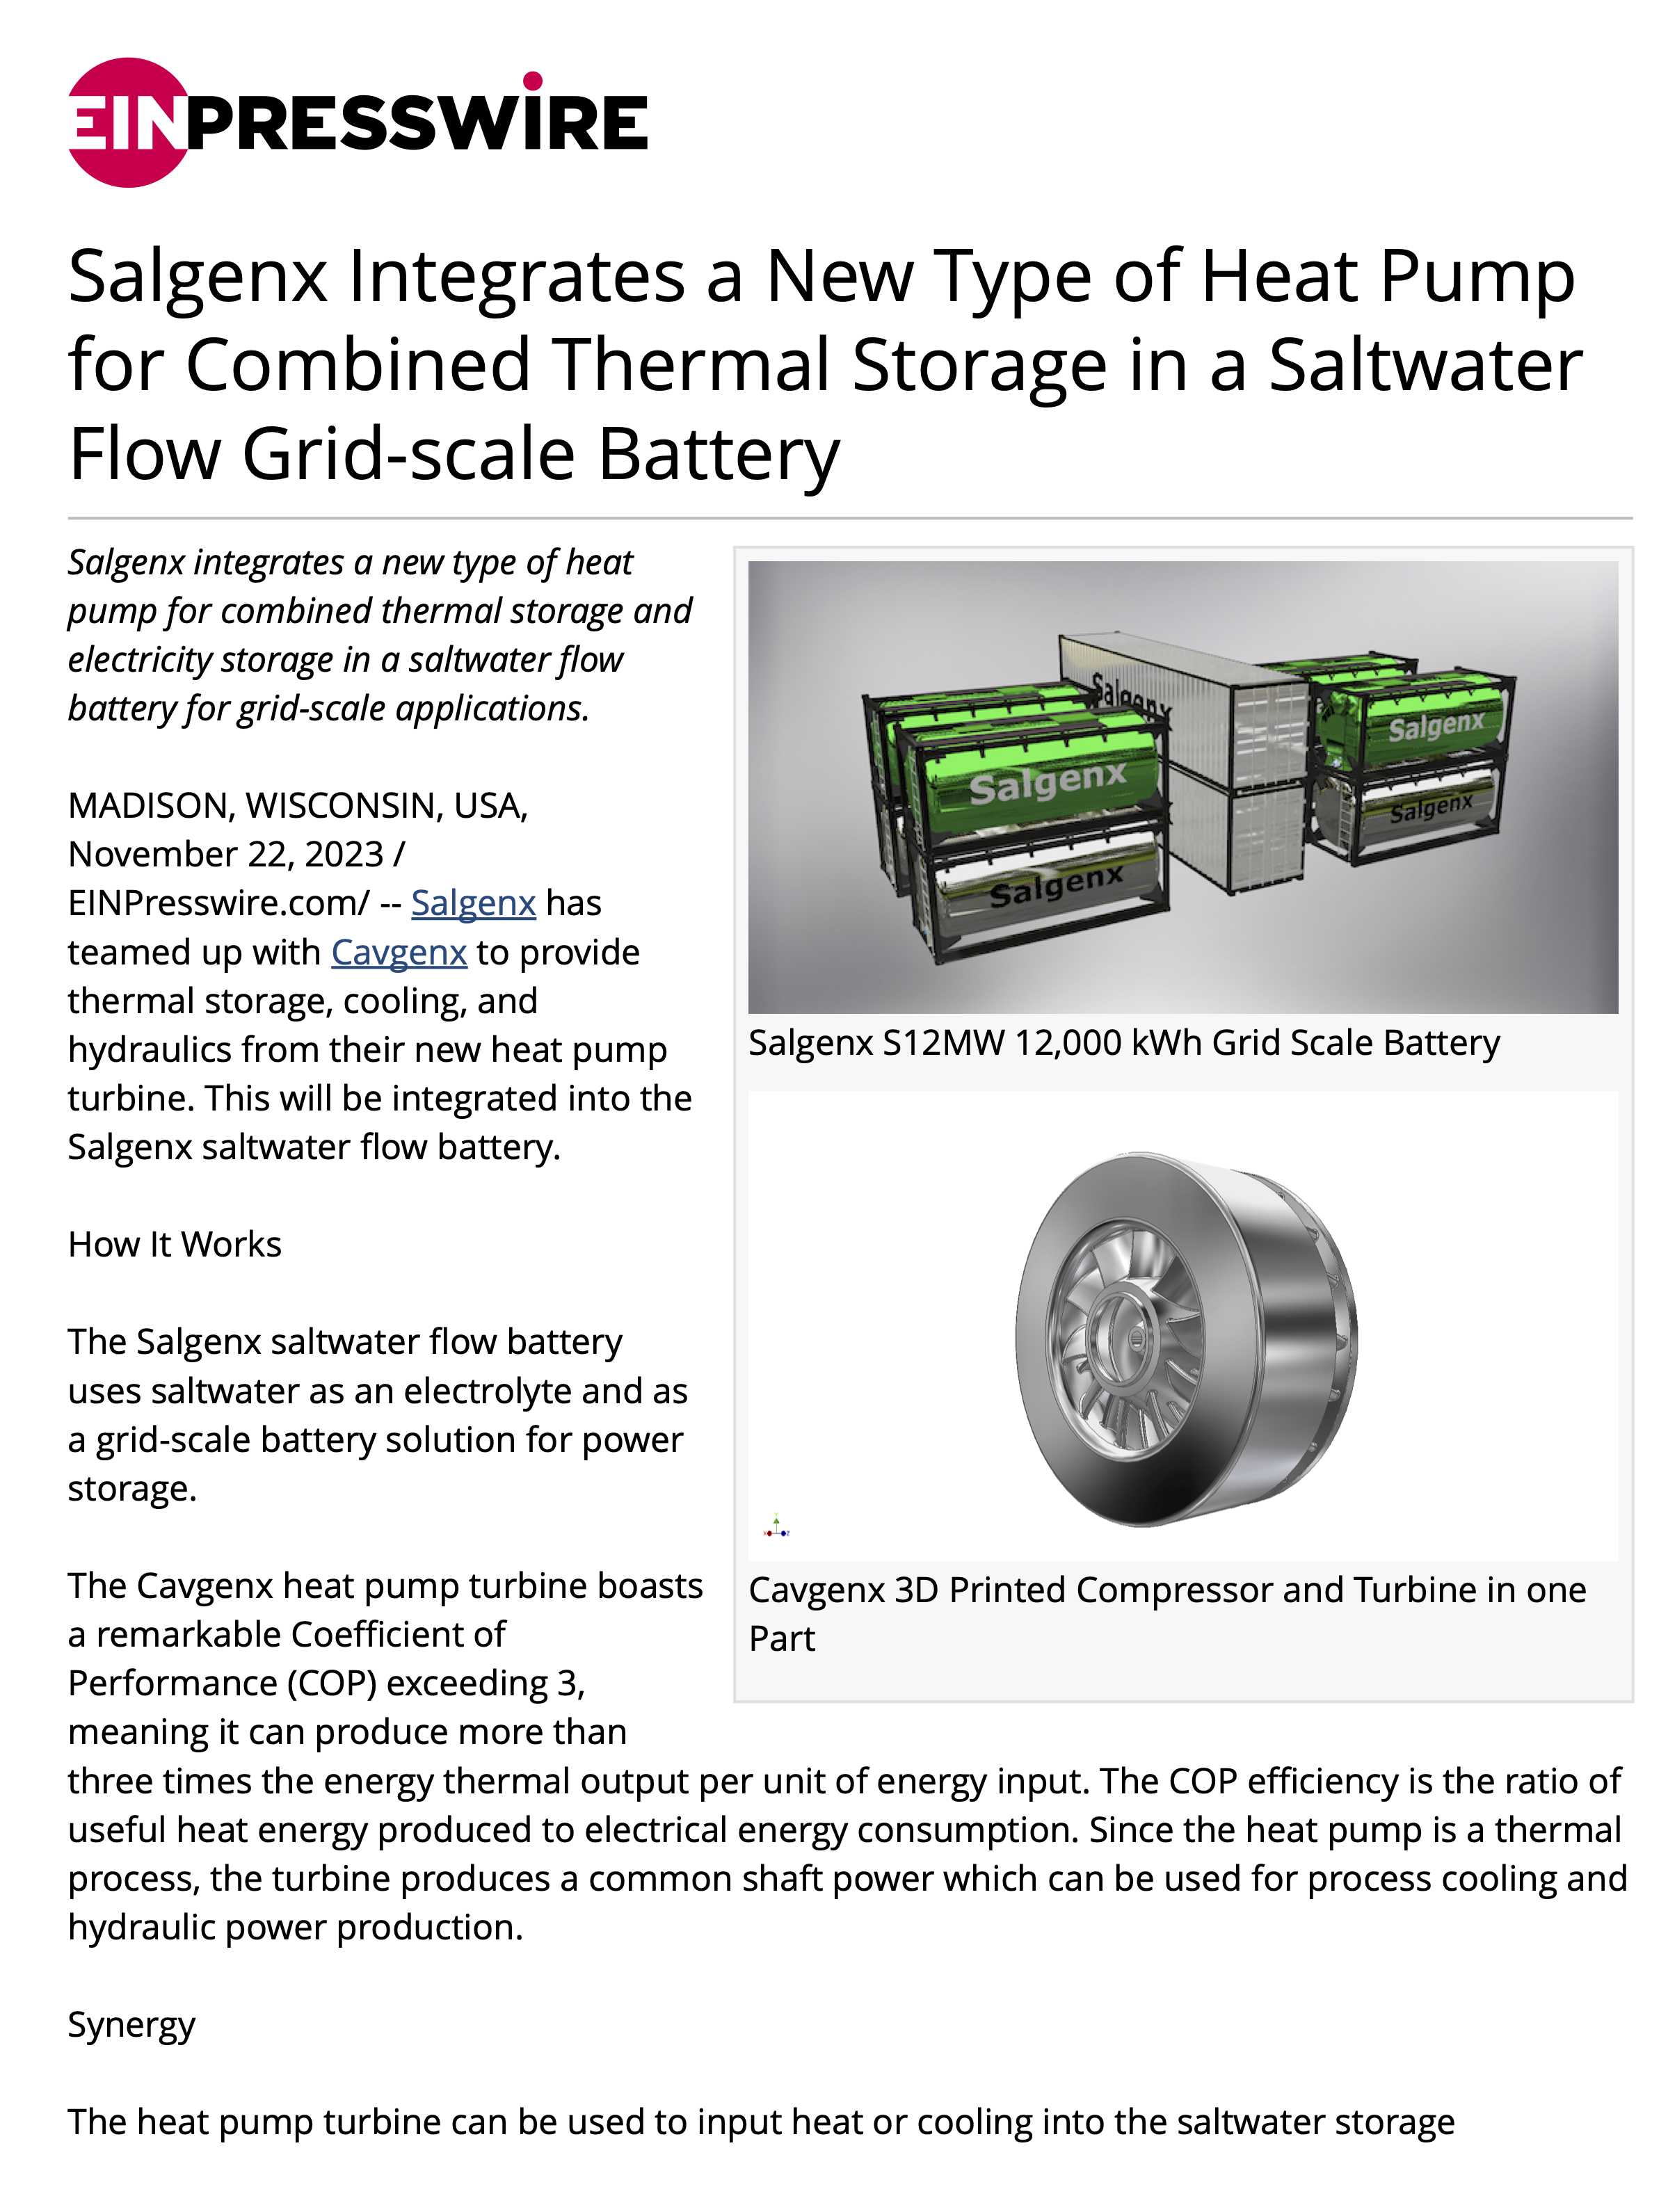 Salgenx Integrates a New Type of Heat Pump for Combined Thermal Storage in a Saltwater Flow Grid-scale Battery